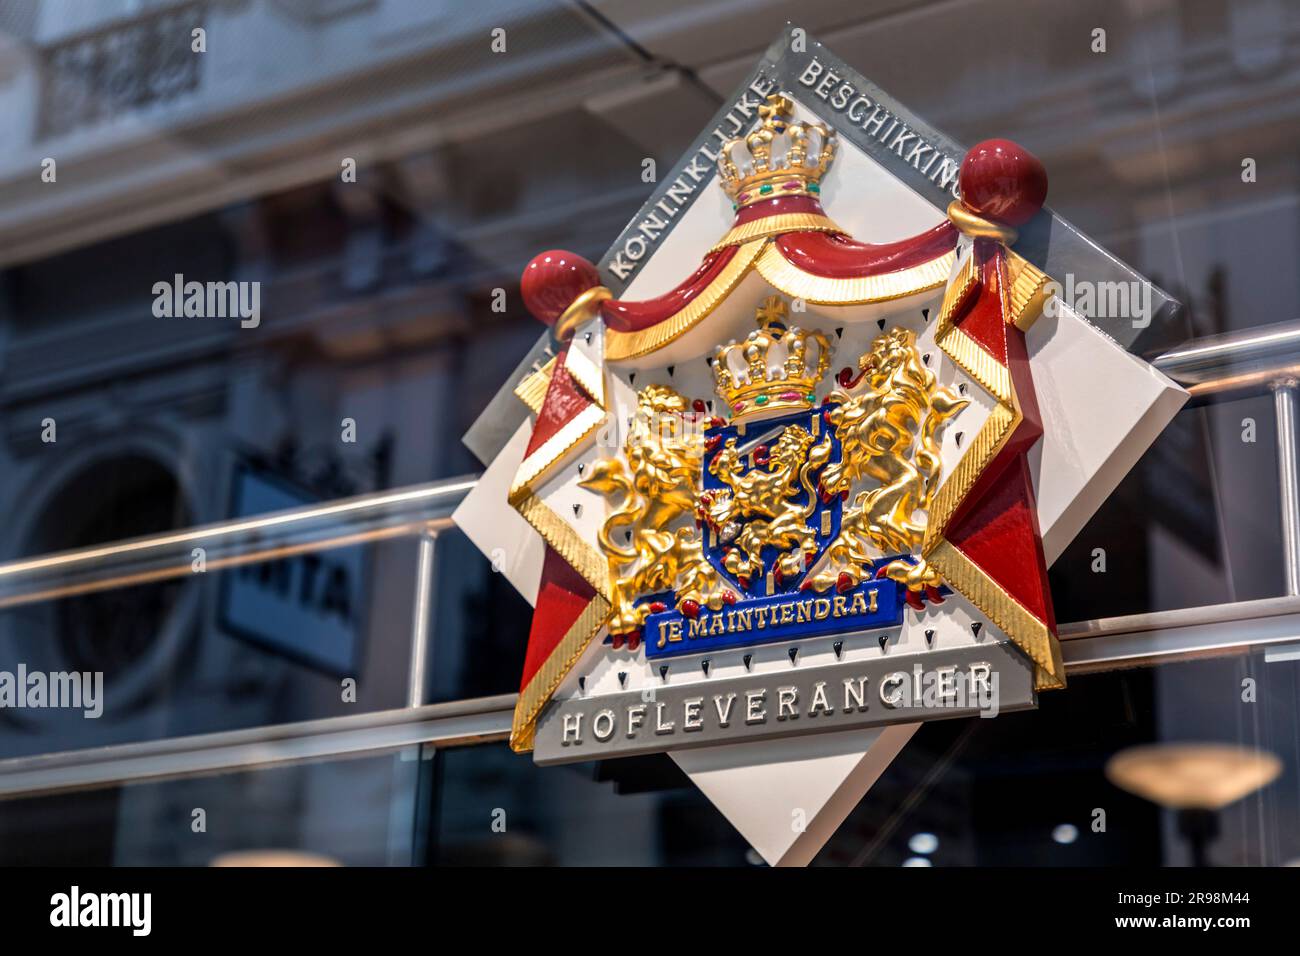 The Hague, Netherlands - October 7, 2021: The royal coat of arms of the Netherlands on a glass wall in The Hague, the roayl seat of government of the Stock Photo